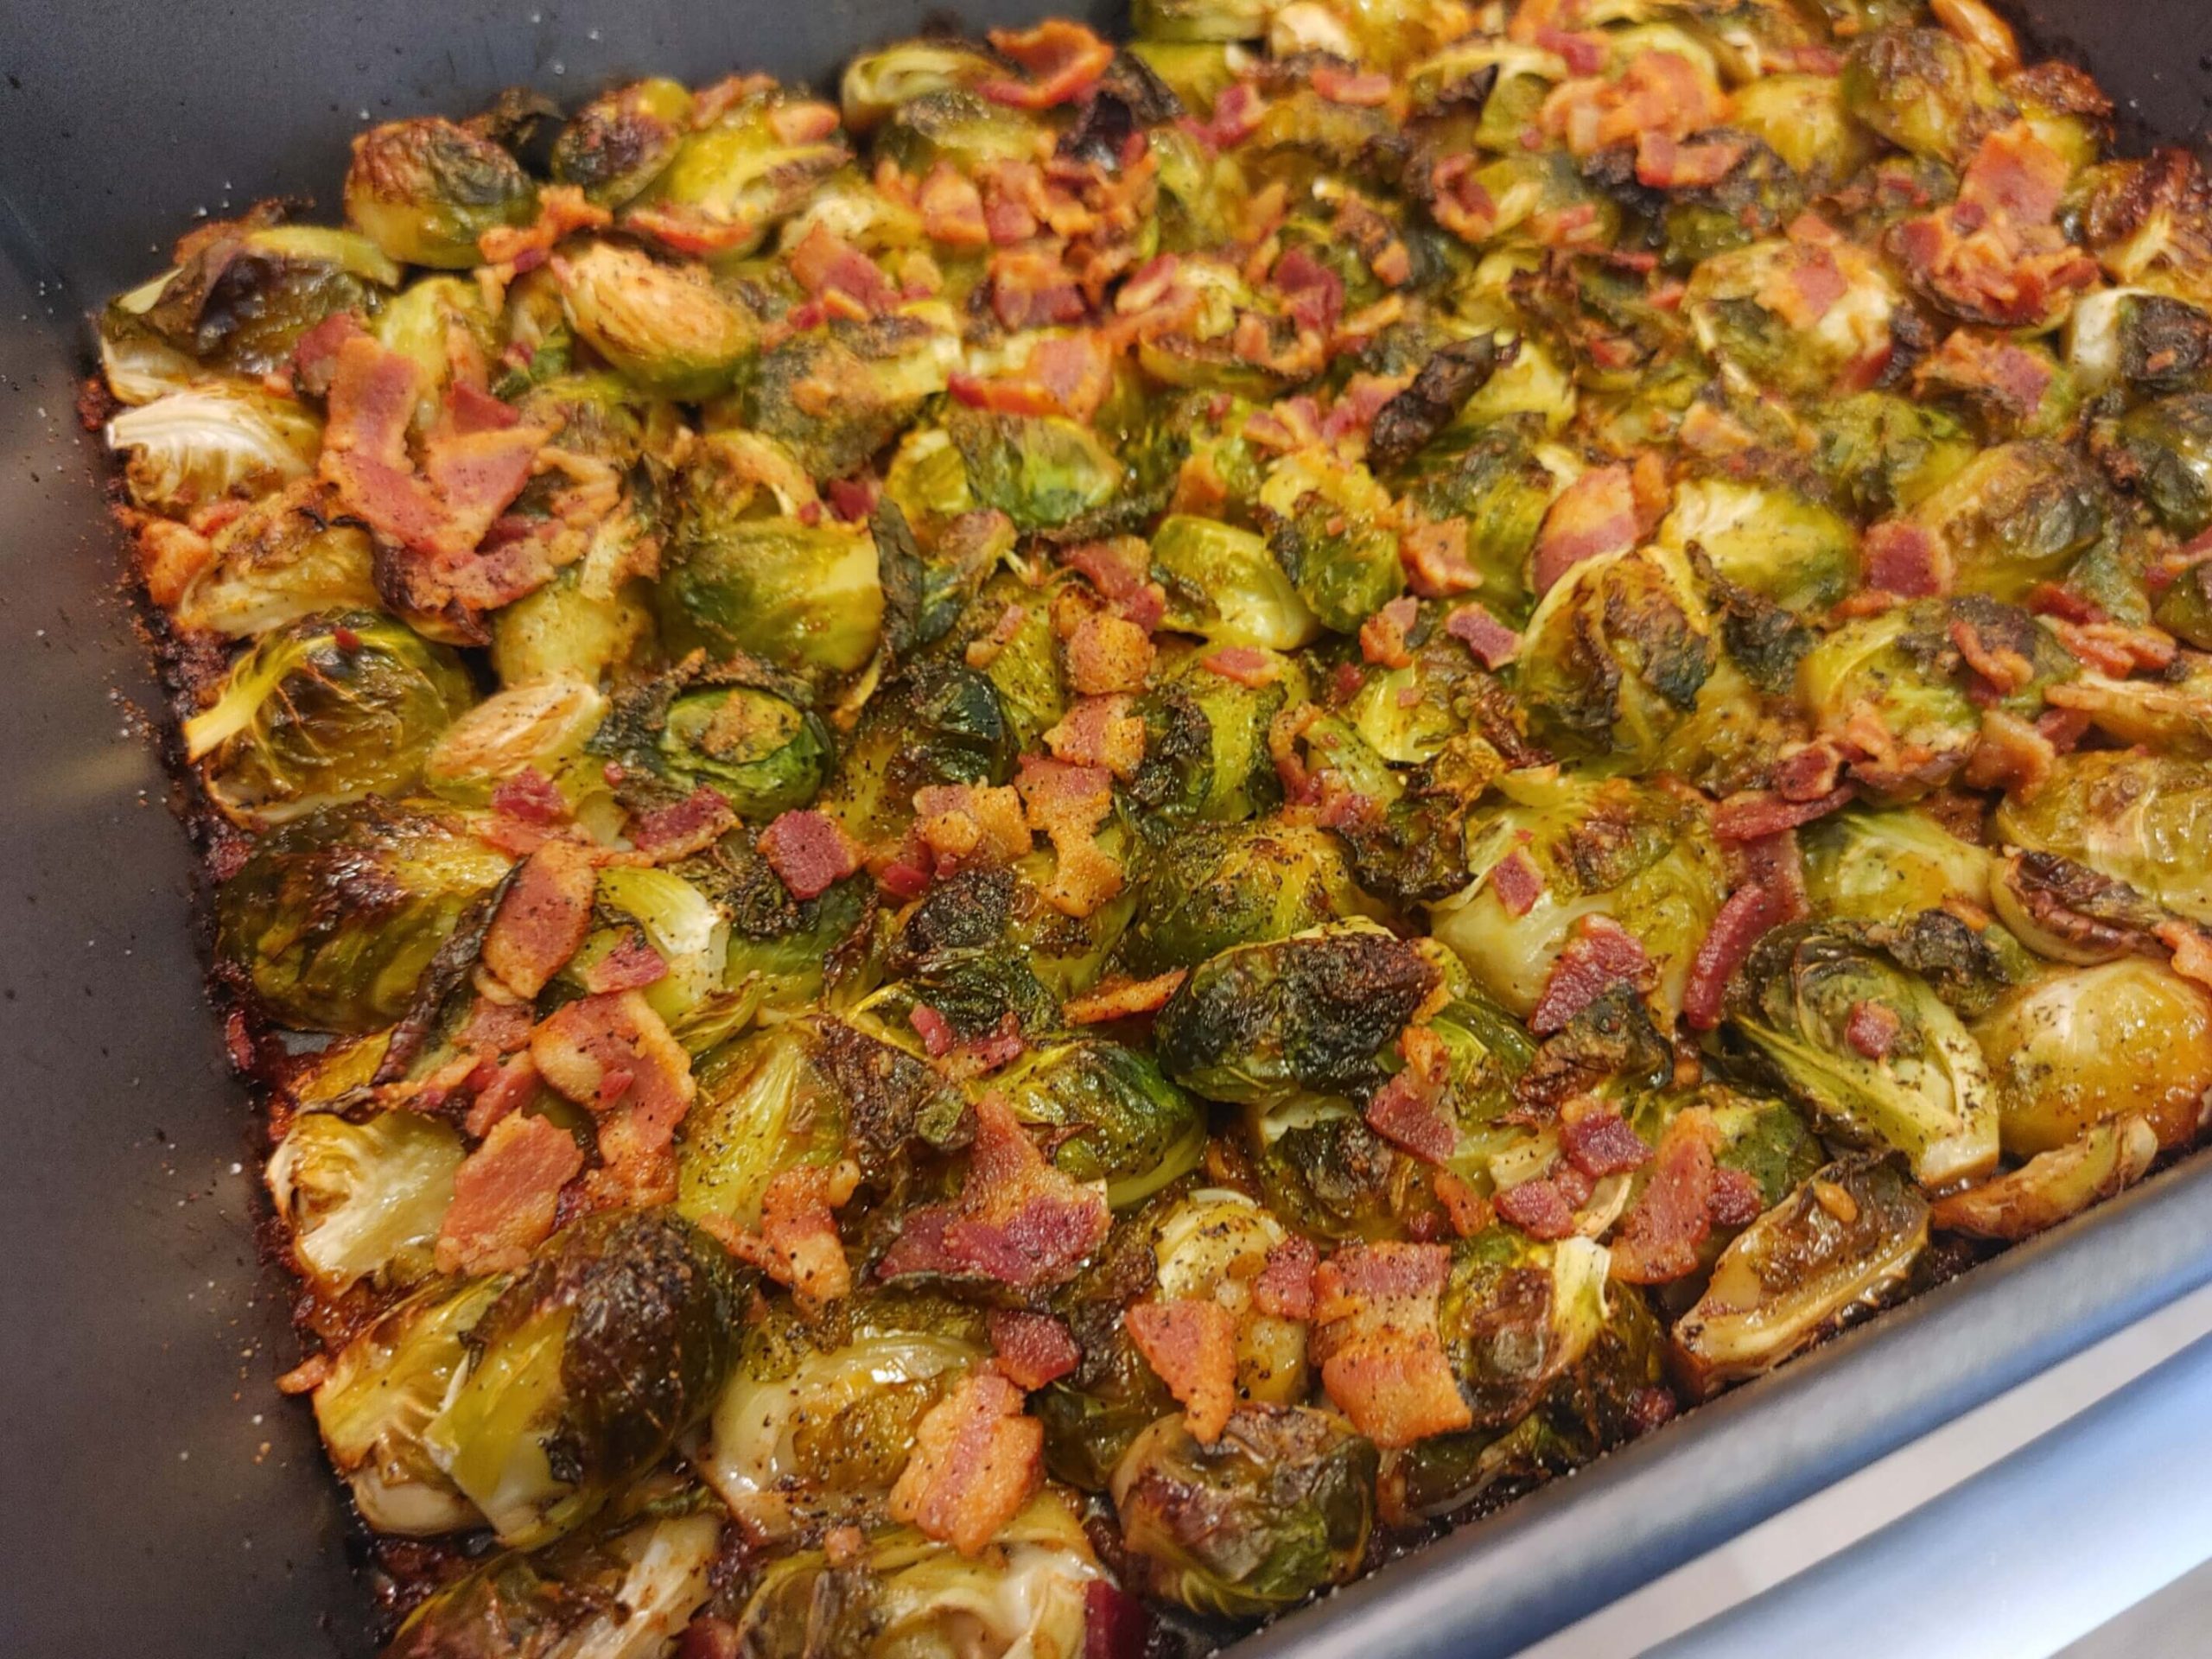 Garlic Parmesan Brussels Sprouts